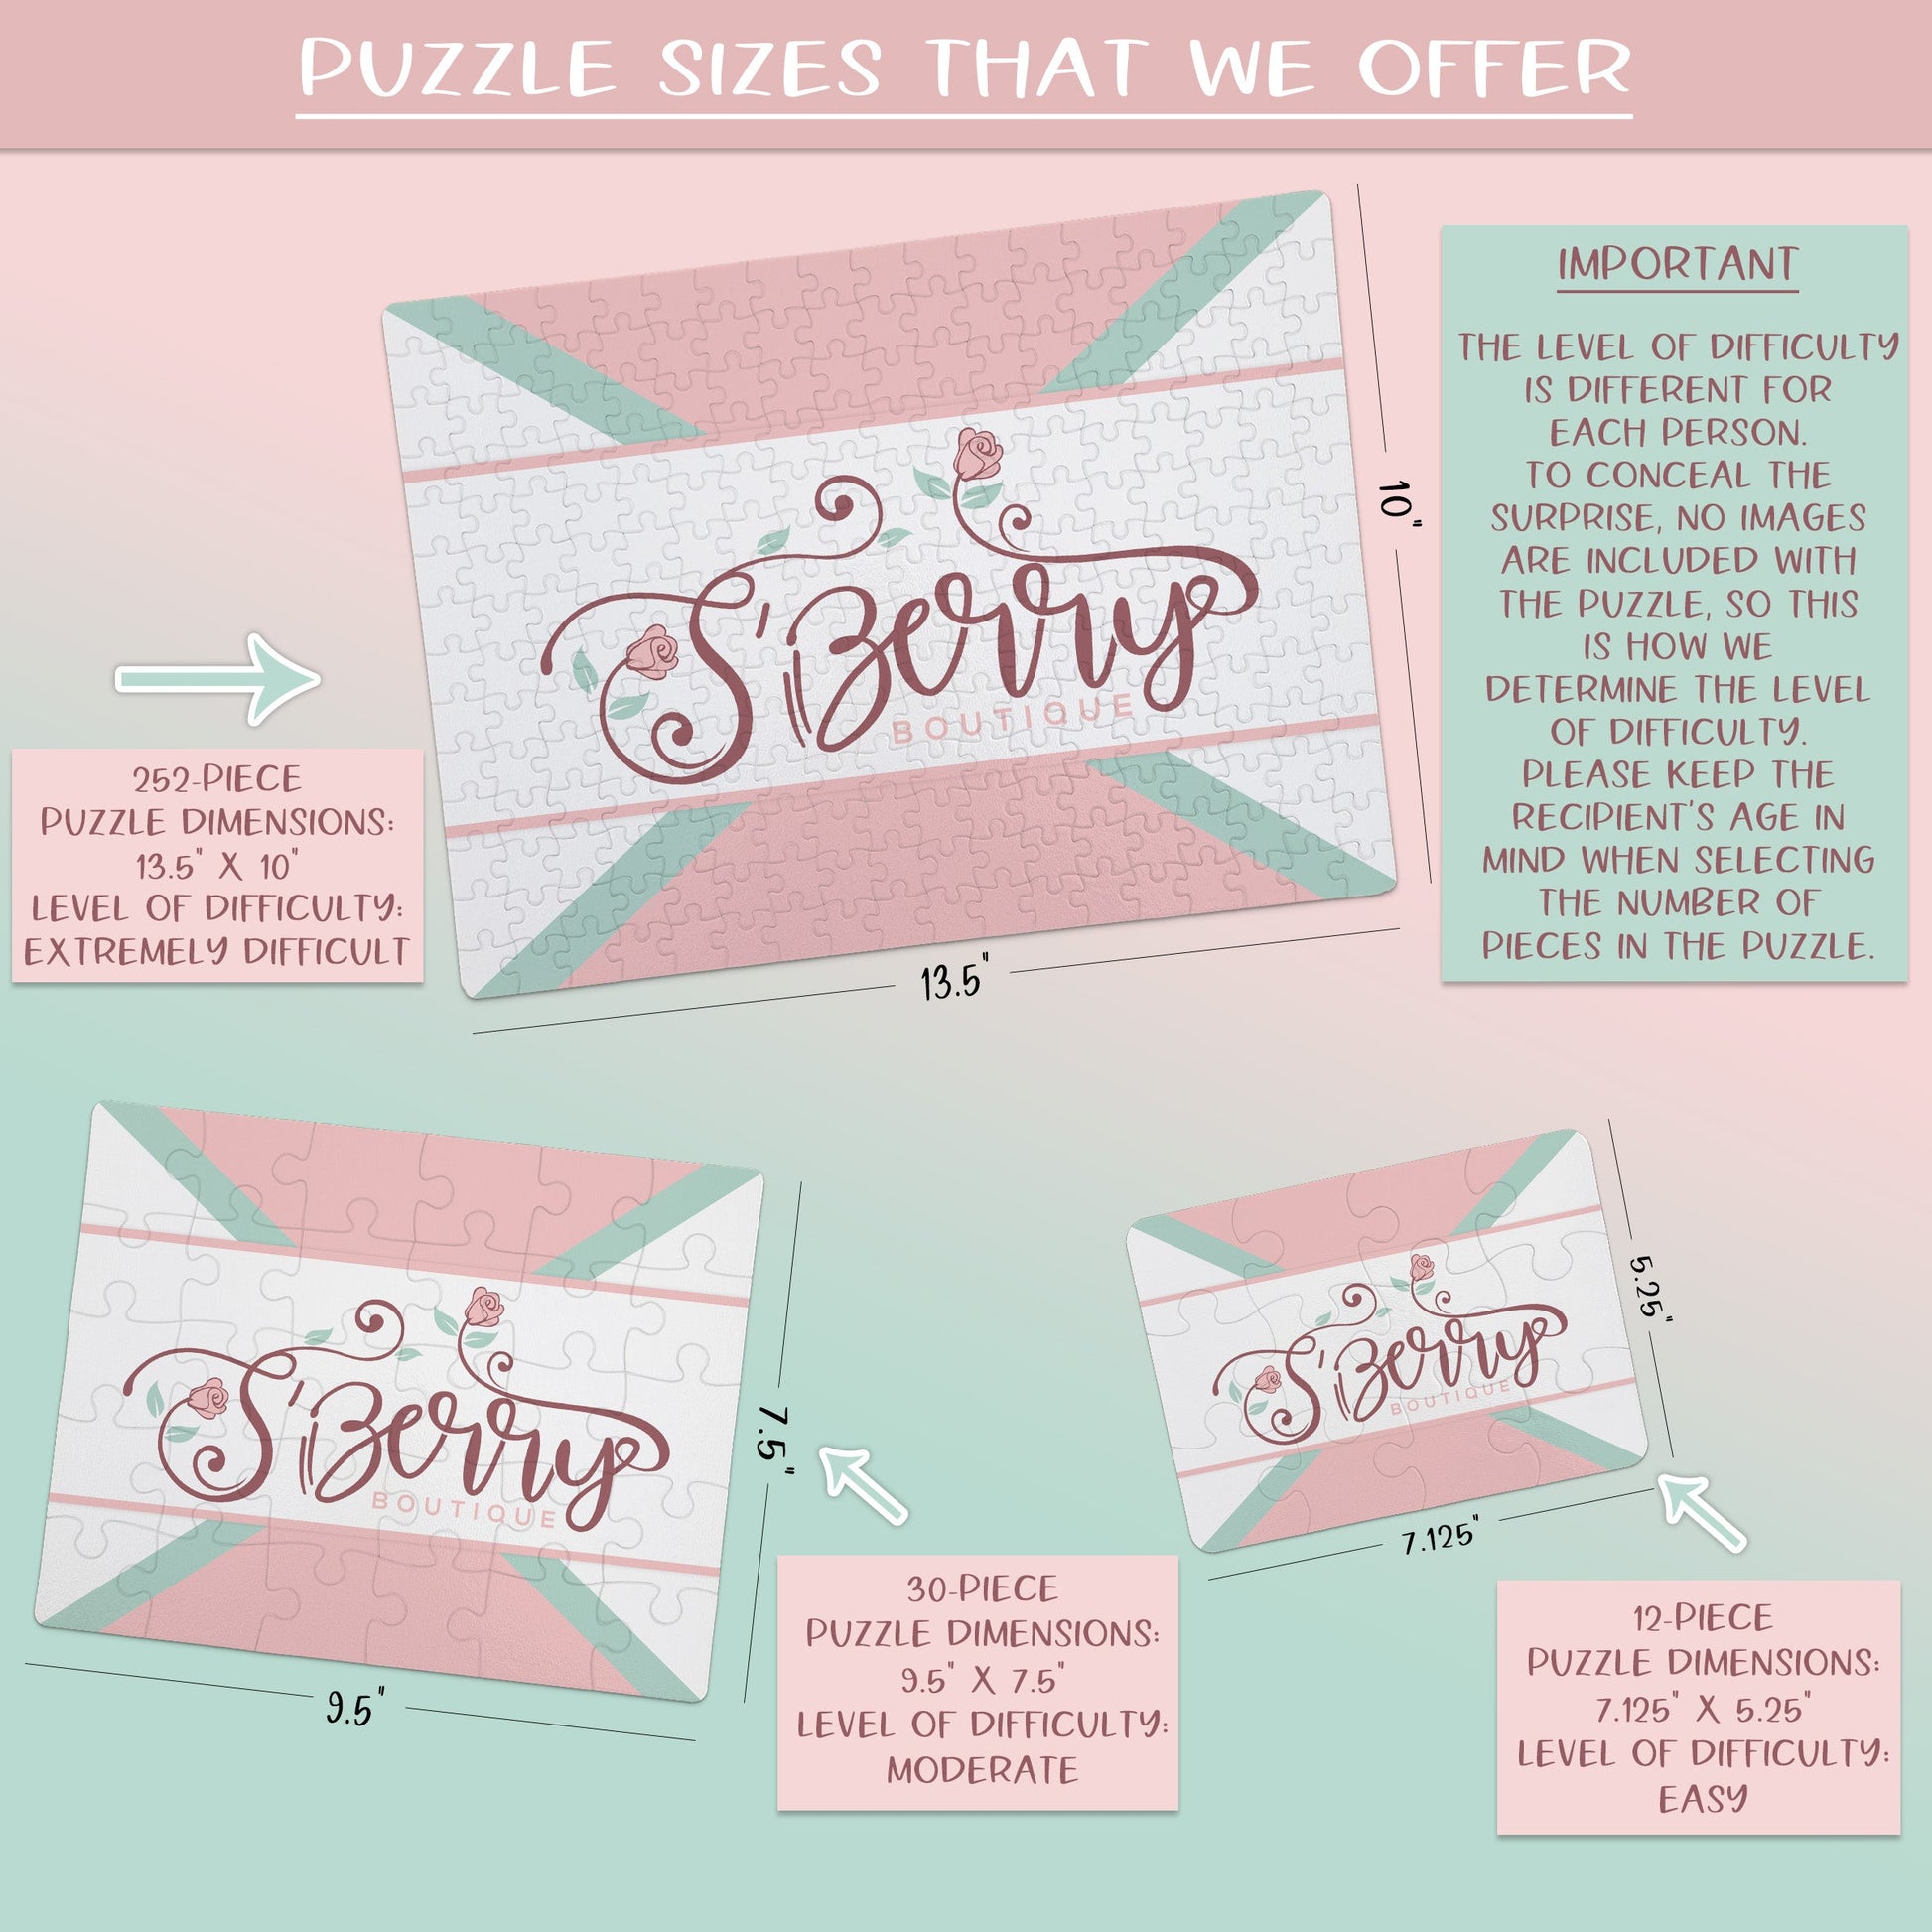 Create Your Own Puzzle - Arrow Design - CYOP0236 | S'Berry Boutique